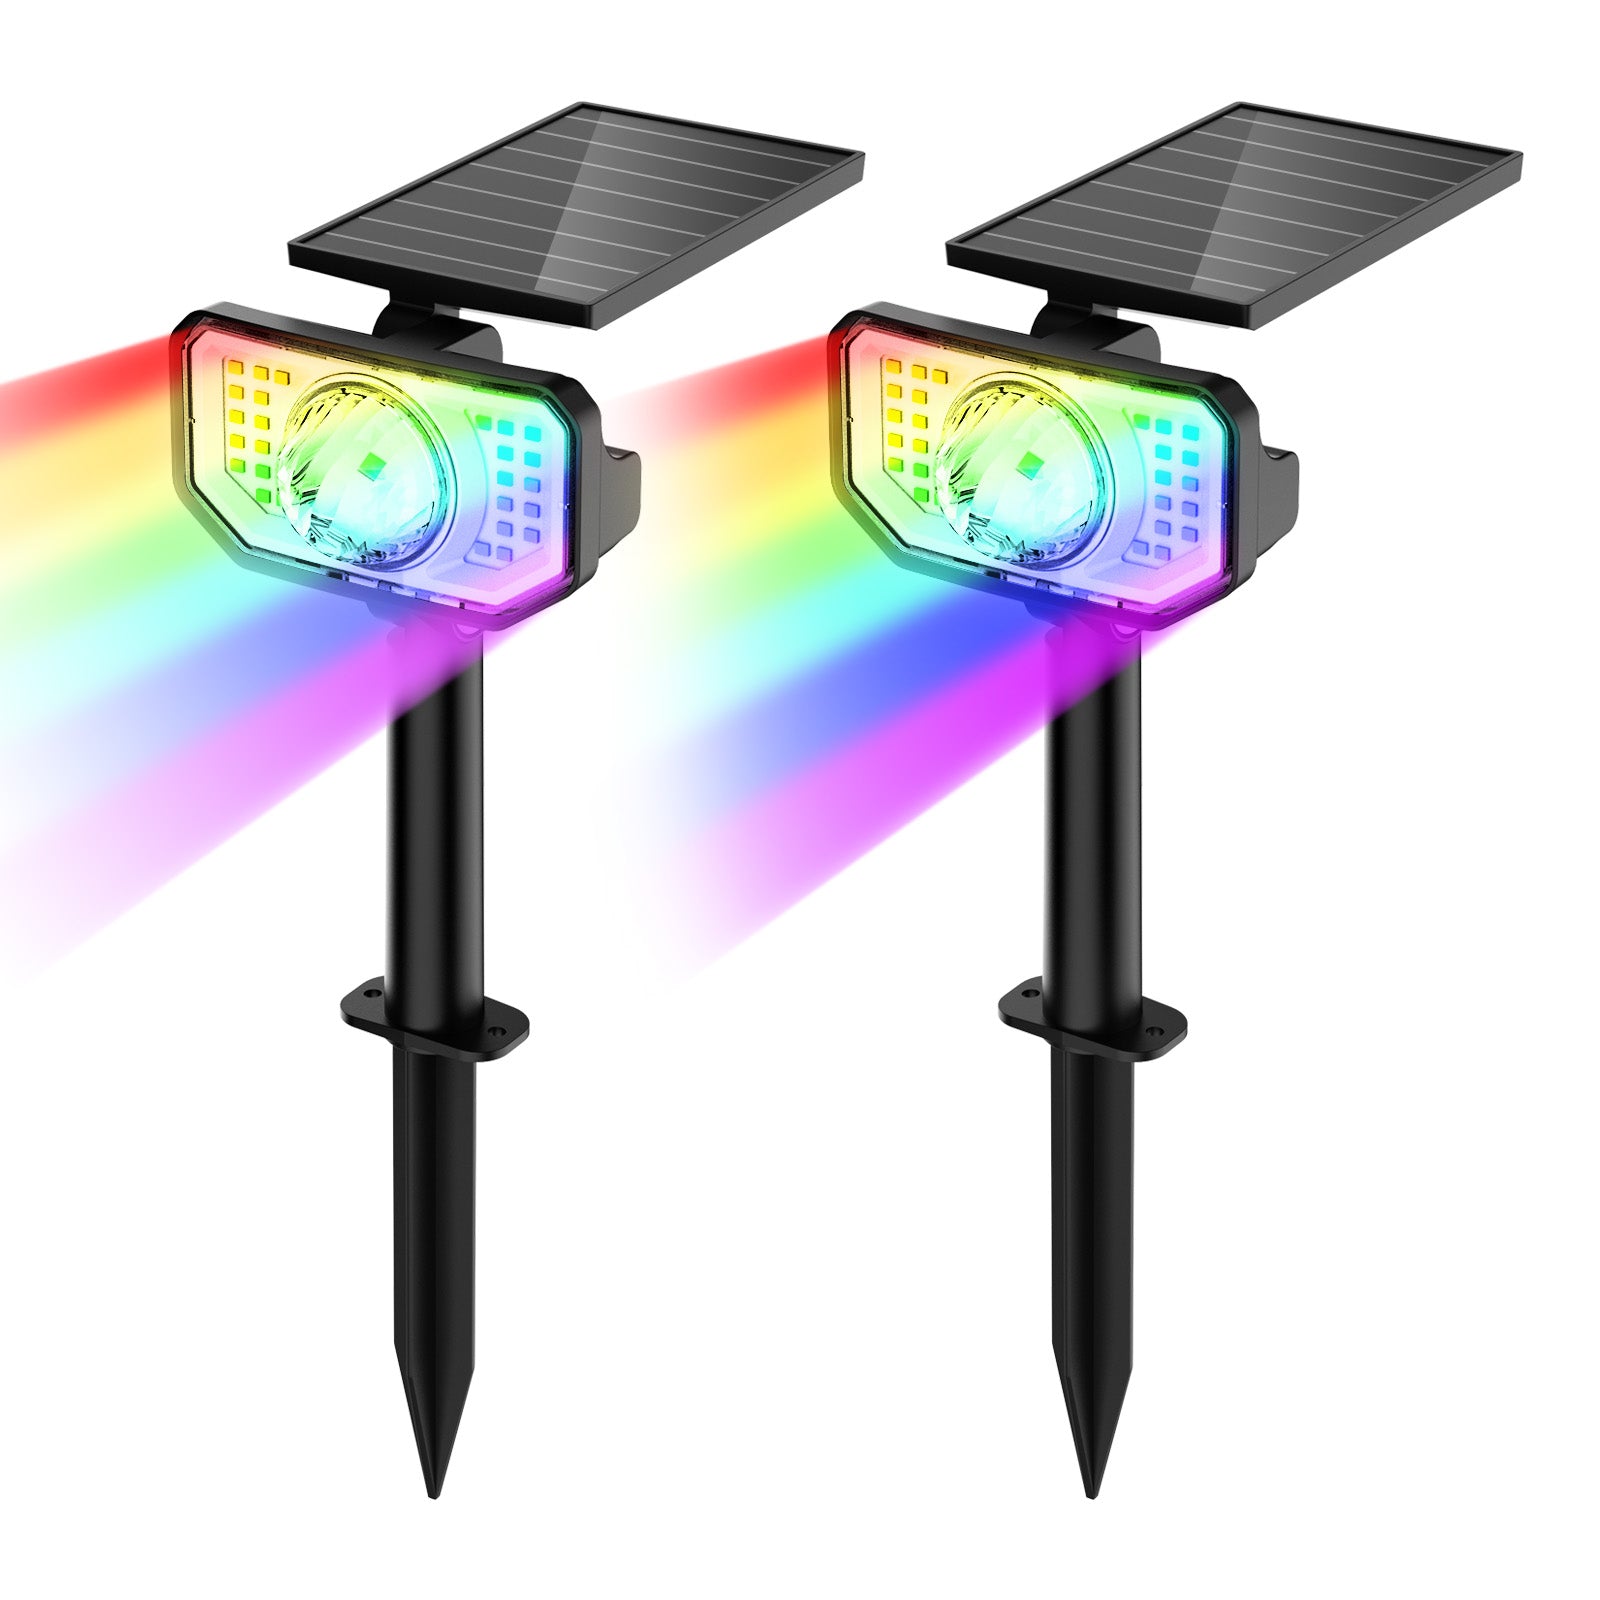 Solar Spotlights Outdoor, 26 LED RGB/Warm White Color Changing Landscape Path Lights, Auto On/Off Solar Powered Path Lights, IP65 Waterproof Outdoor Lights, 2 Pack OL007